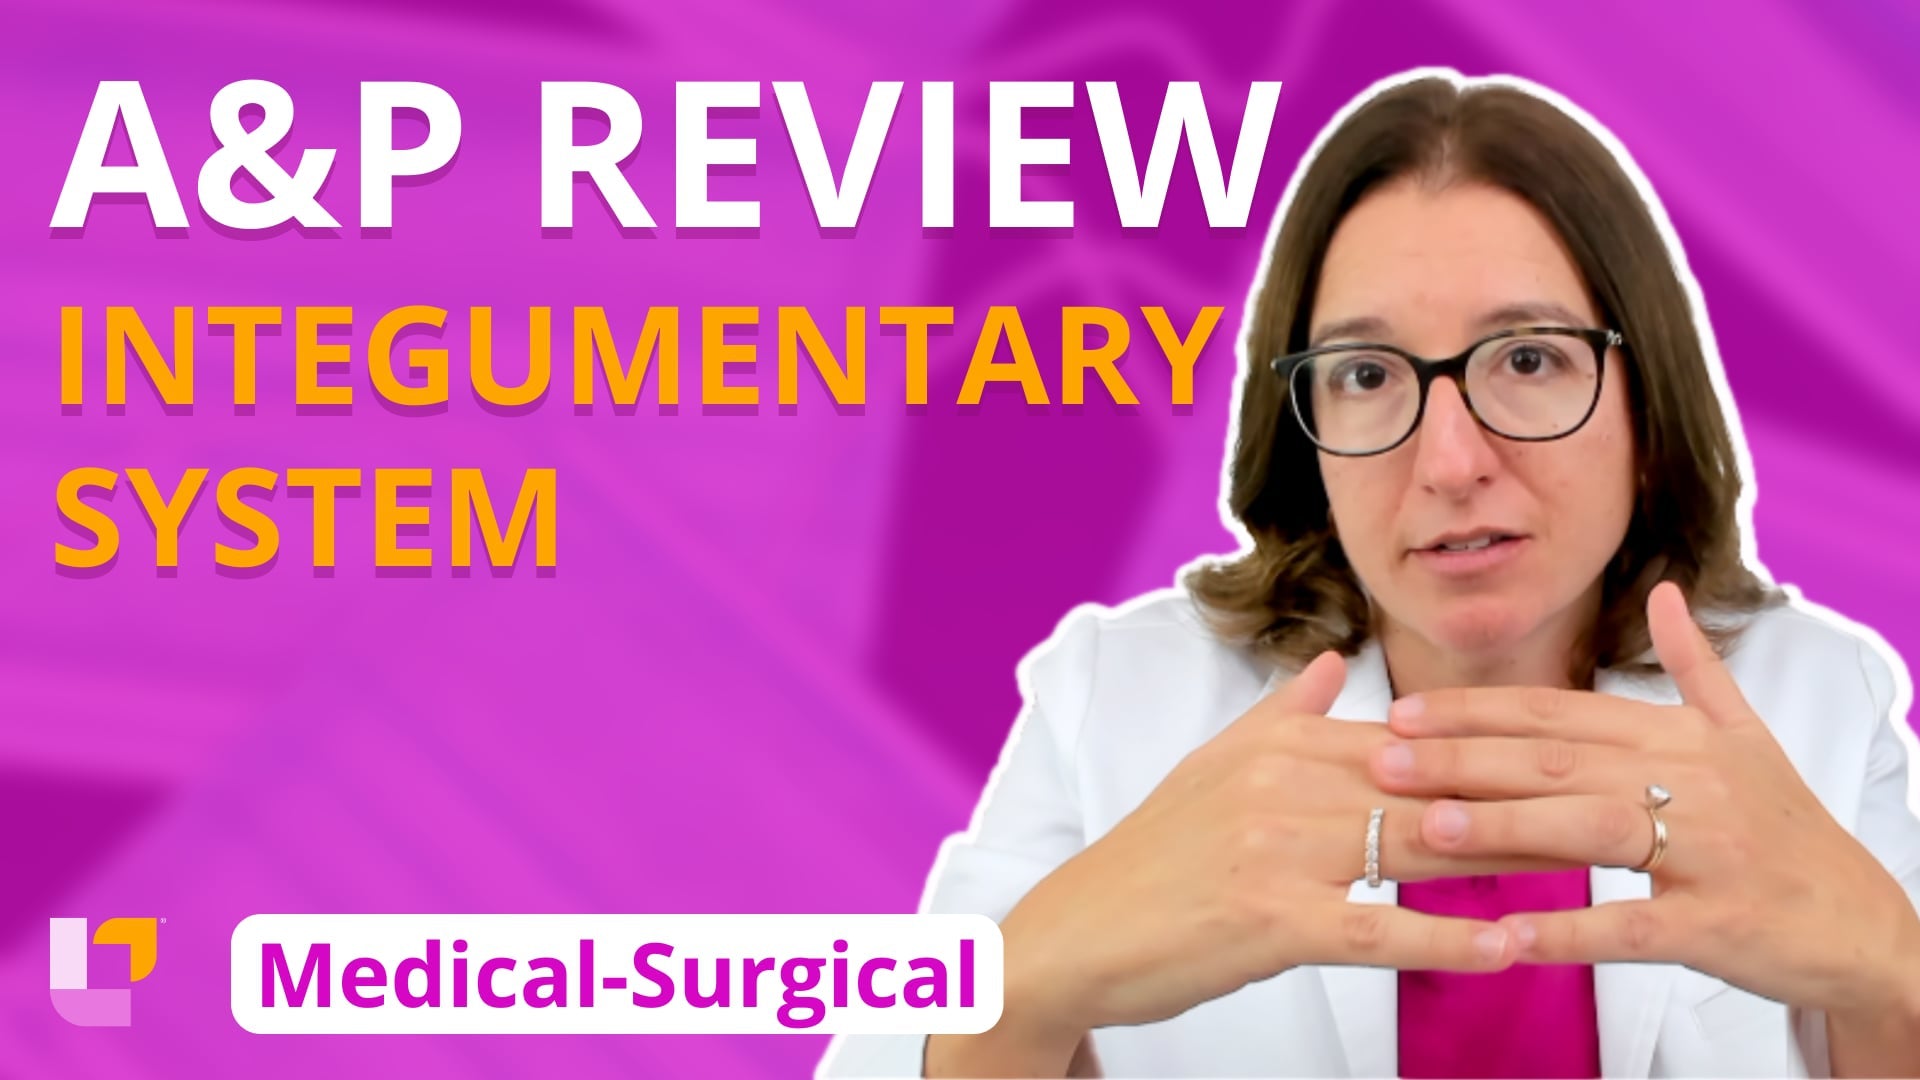 Med-Surg - Integumentary System, part 1: Anatomy & Physiology Review - LevelUpRN